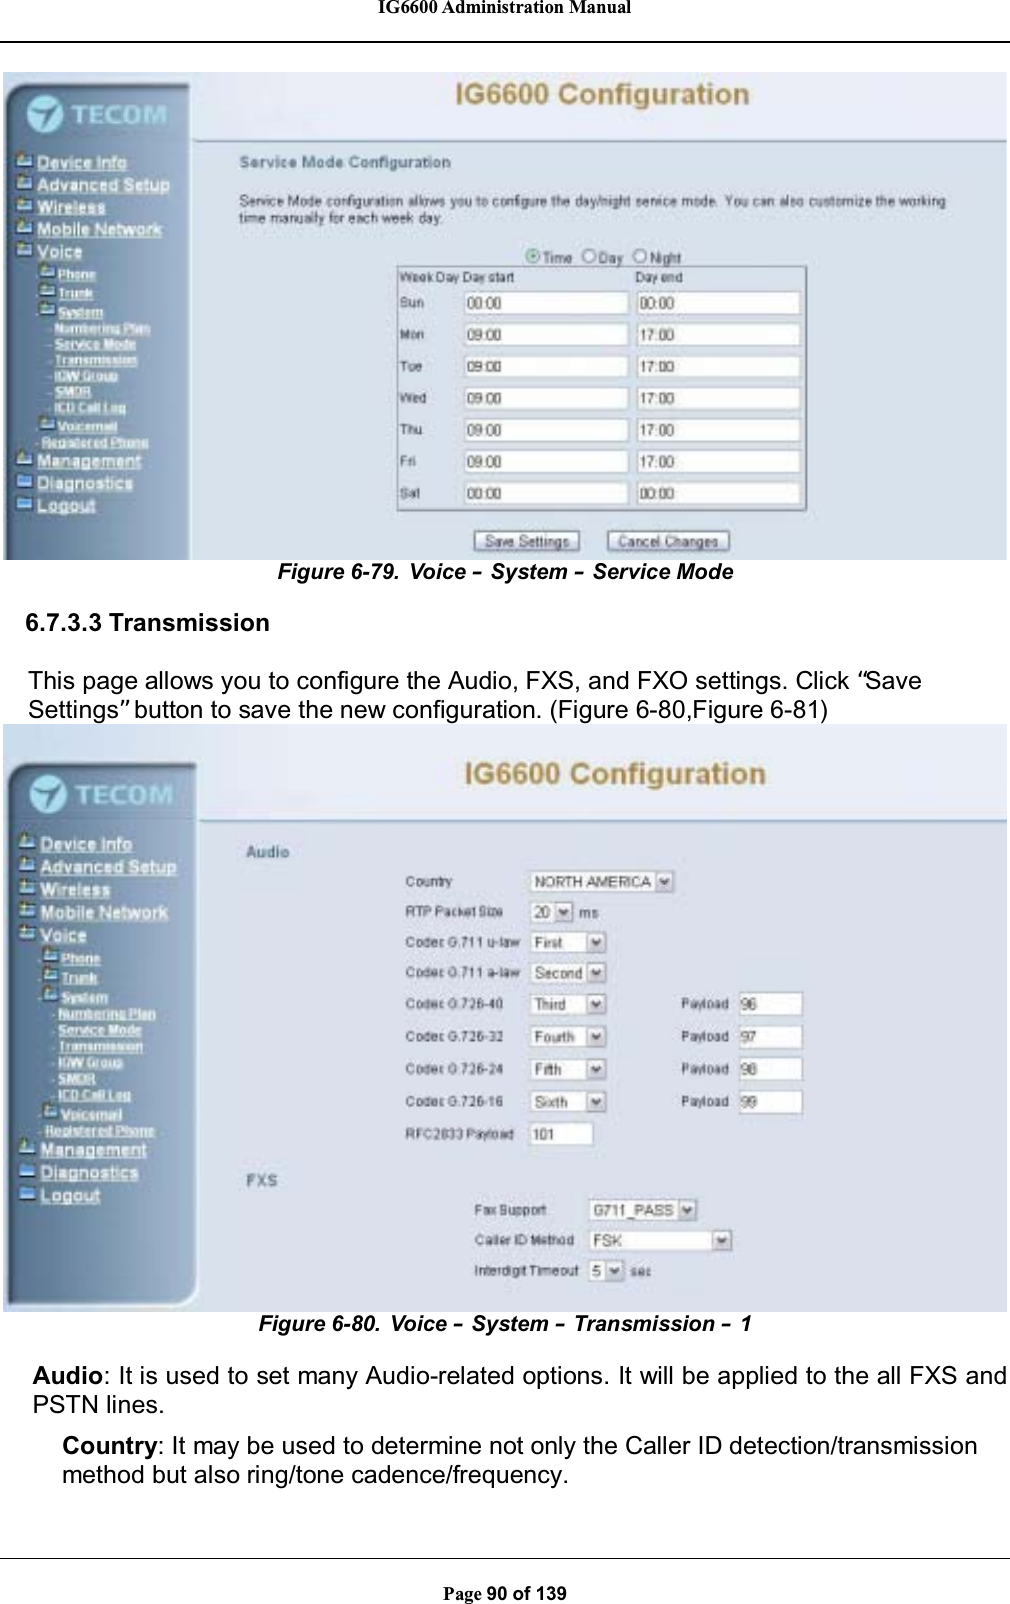 IG6600 Administration ManualPage 90 of 139Figure 6-79. Voice –System –Service Mode6.7.3.3 TransmissionThis page allows you to configure the Audio, FXS, and FXO settings. Click “SaveSettings”button to save the new configuration. (Figure 6-80,Figure 6-81)Figure 6-80. Voice –System –Transmission –1Audio: It is used to set many Audio-related options. It will be applied to the all FXS andPSTN lines.Country: It may be used to determine not only the Caller ID detection/transmissionmethod but also ring/tone cadence/frequency.